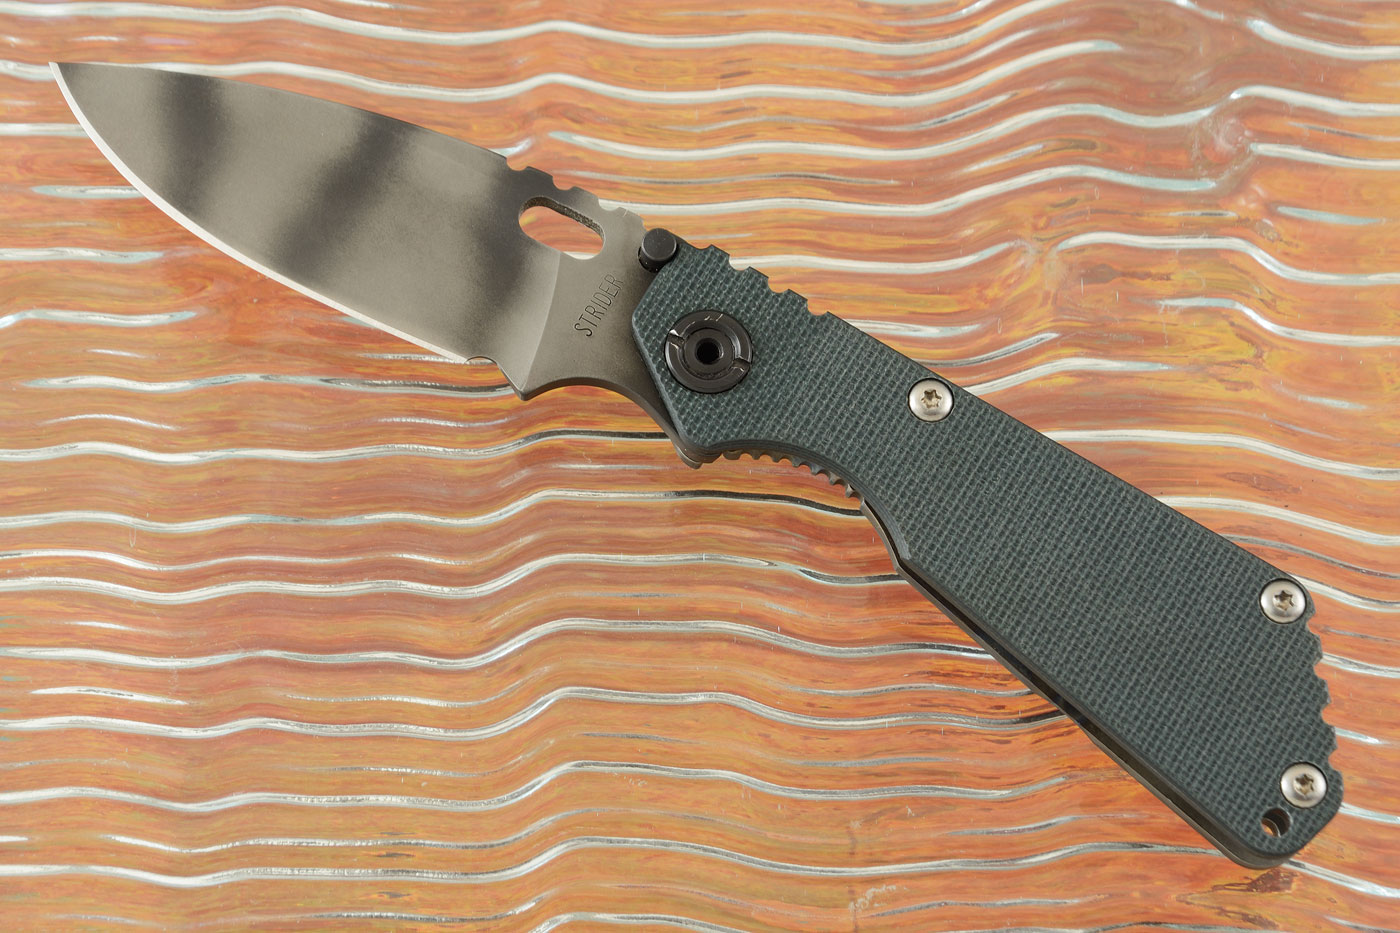 SnG, OD Green G10 and Tiger Stripe Finish